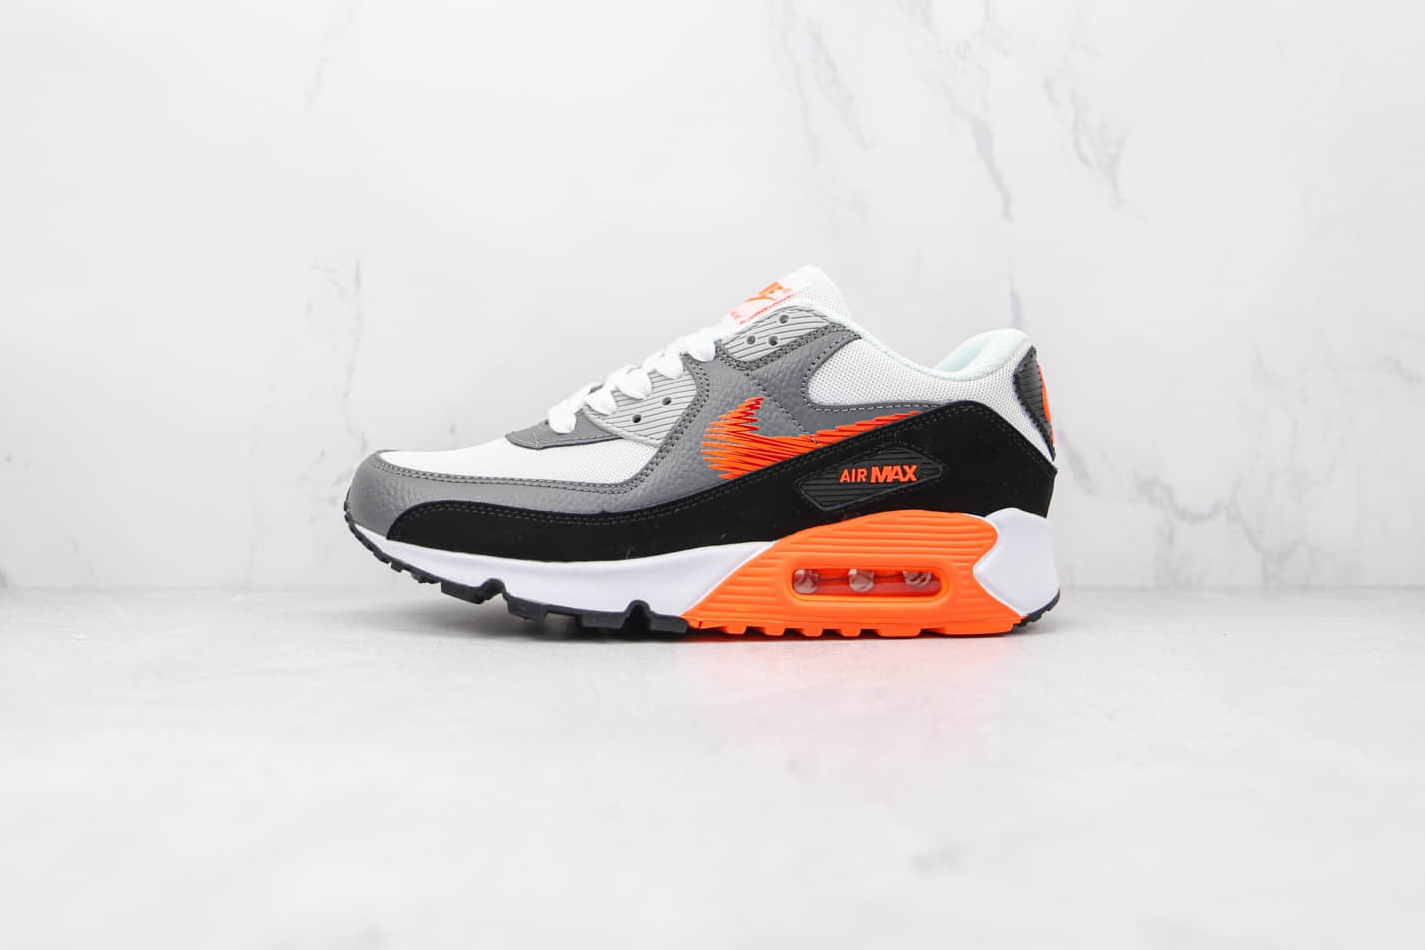 Nike Air Max 90 'Zig Zag' DN4927-100 - Trendy Sneakers for Stylish Outfits